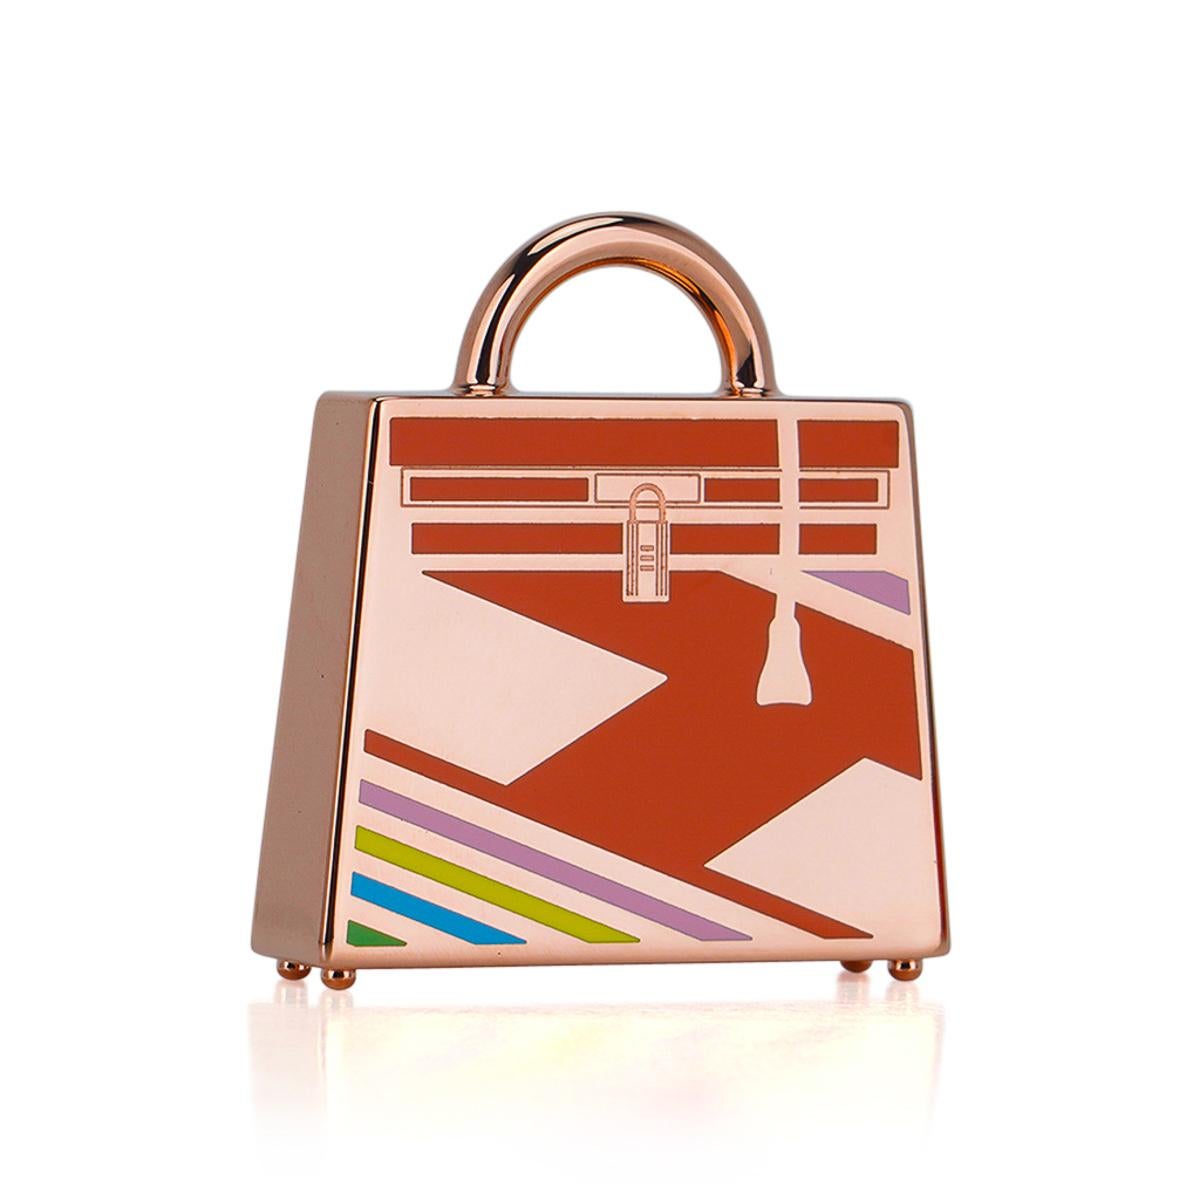 Mightychic offers an Hermes Curiosite Kelly Laque H Vibration charm featured in Acidule with Rose Gold plated hardware.
Shaped like a Kelly Bag, the charm is beautifully lacquered and engraved!
Featuring the H Vibration motif.
Designed as a necklace